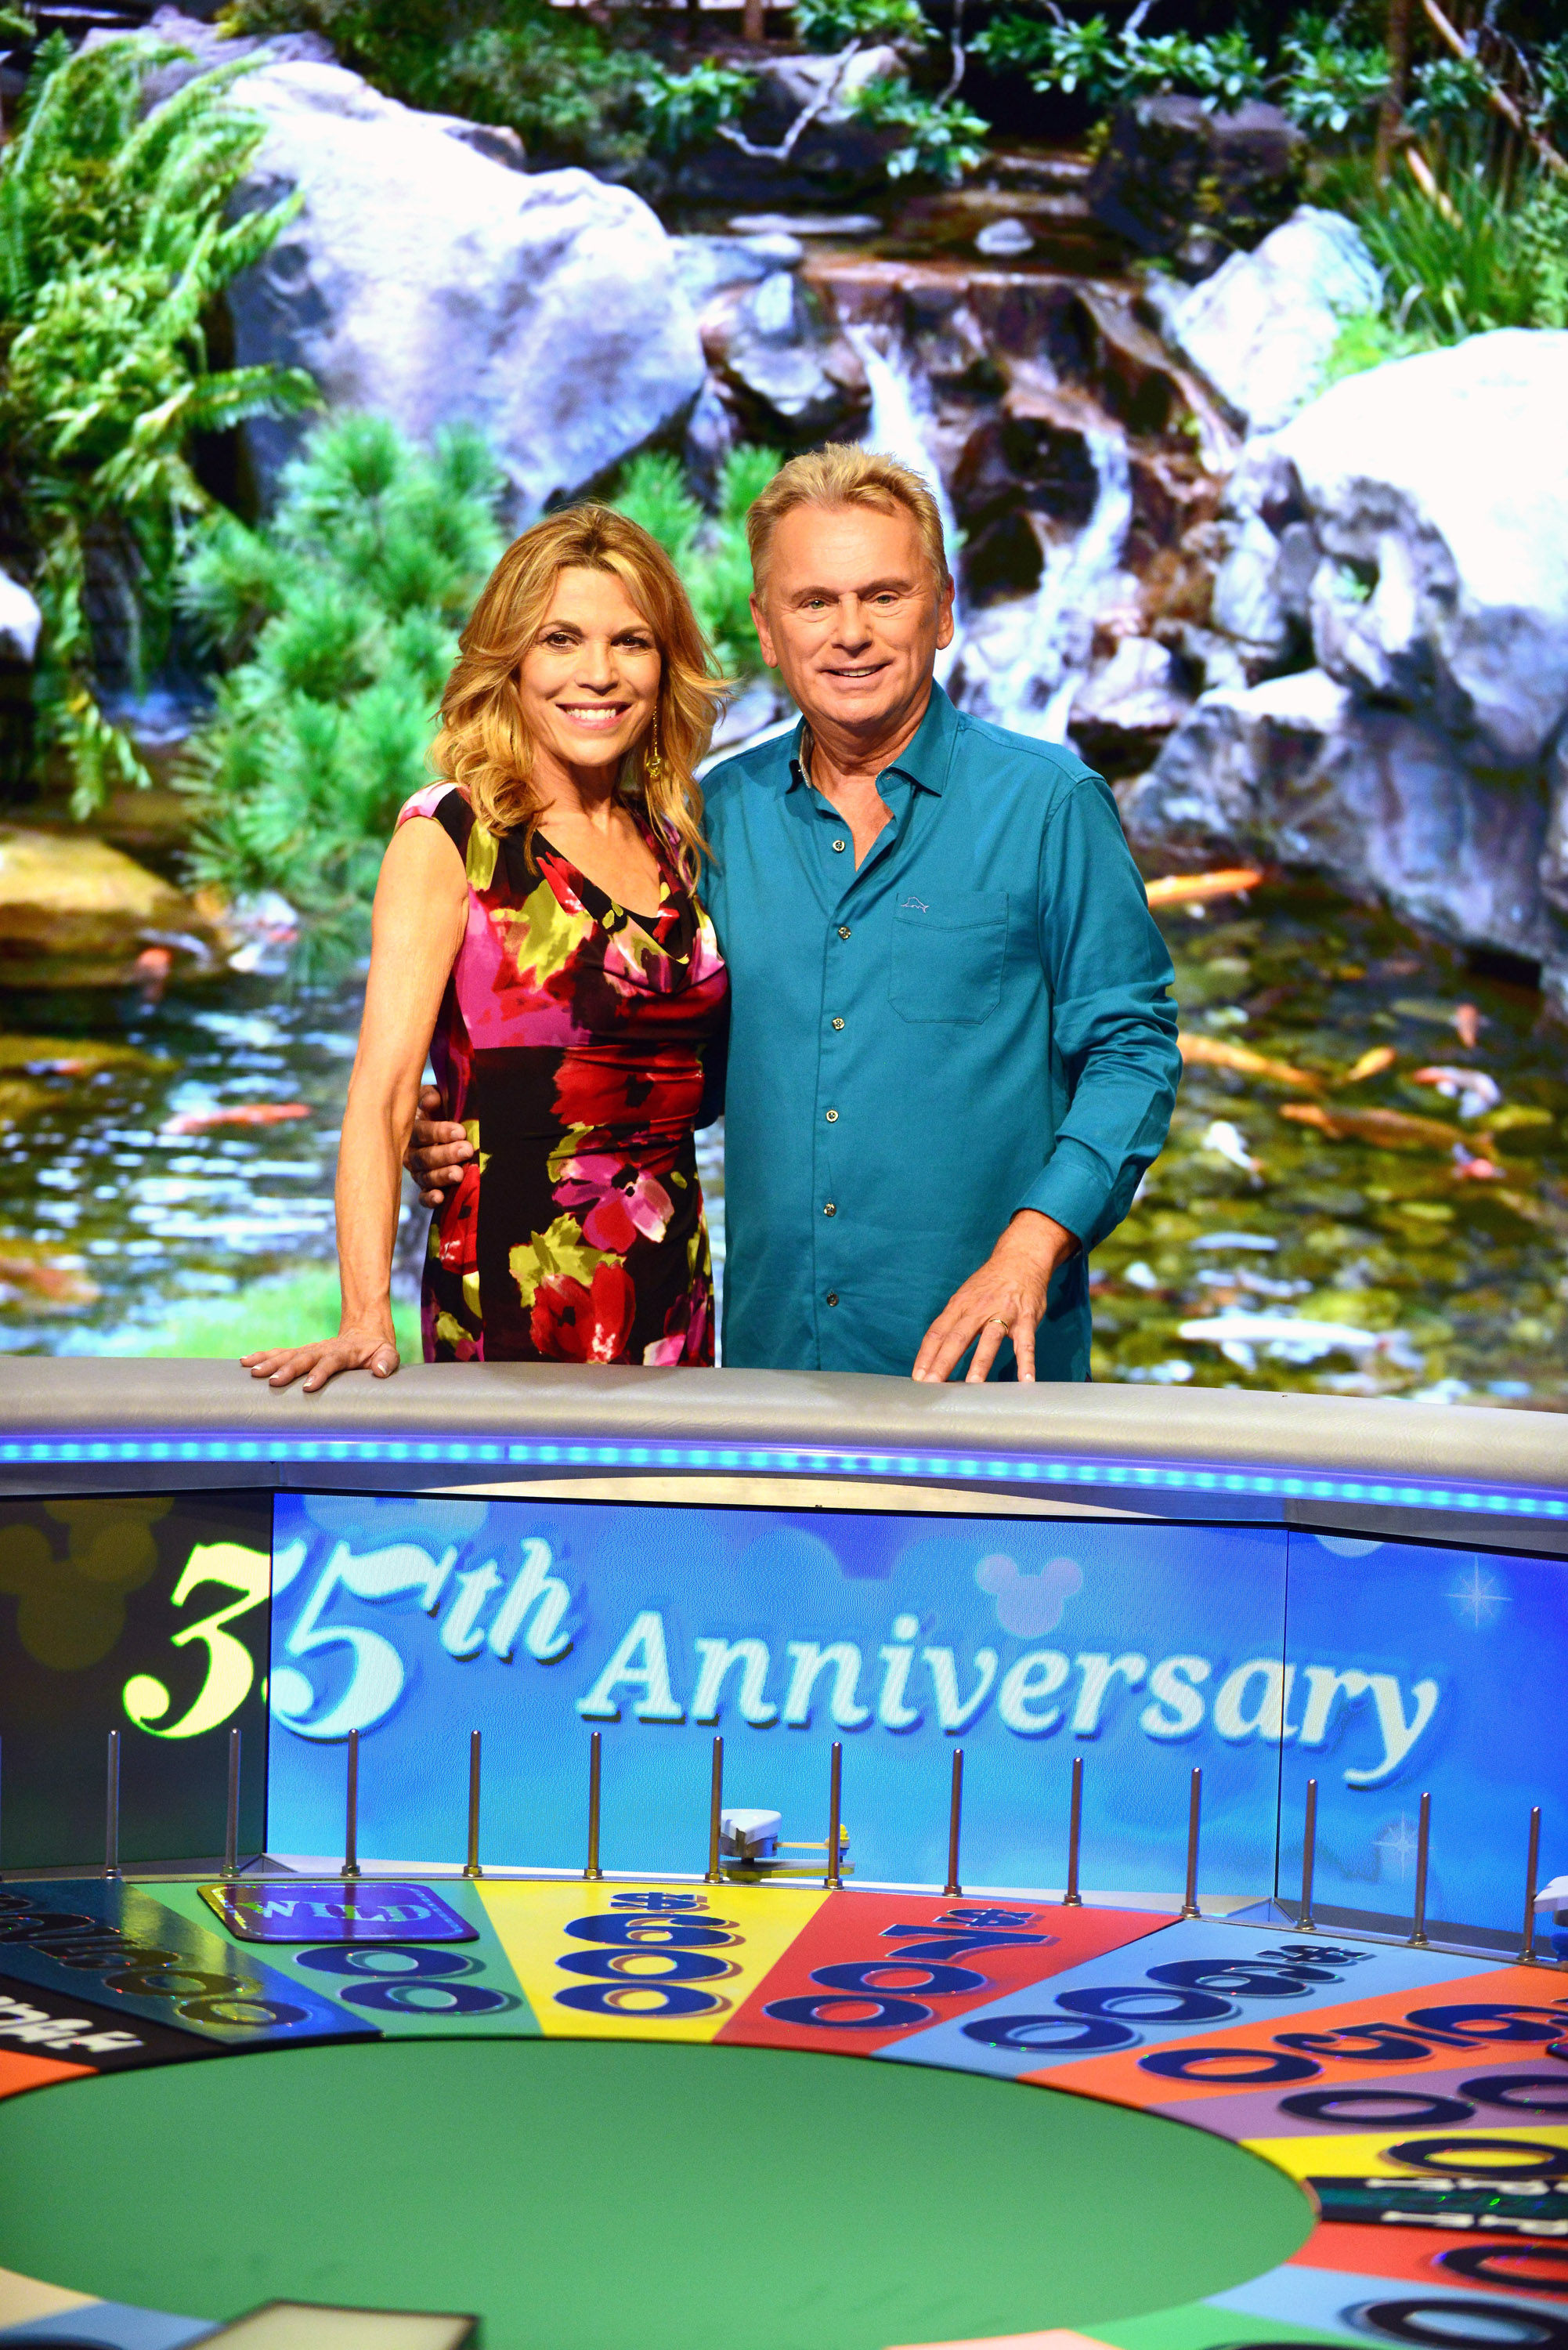 Vanna White and Pat Sajak during taping of the 35th Anniversary Season of the "Wheel of Fortune" at the Walt Disney World in Orlando, Florida on October 10, 2017 | Source: Getty Images